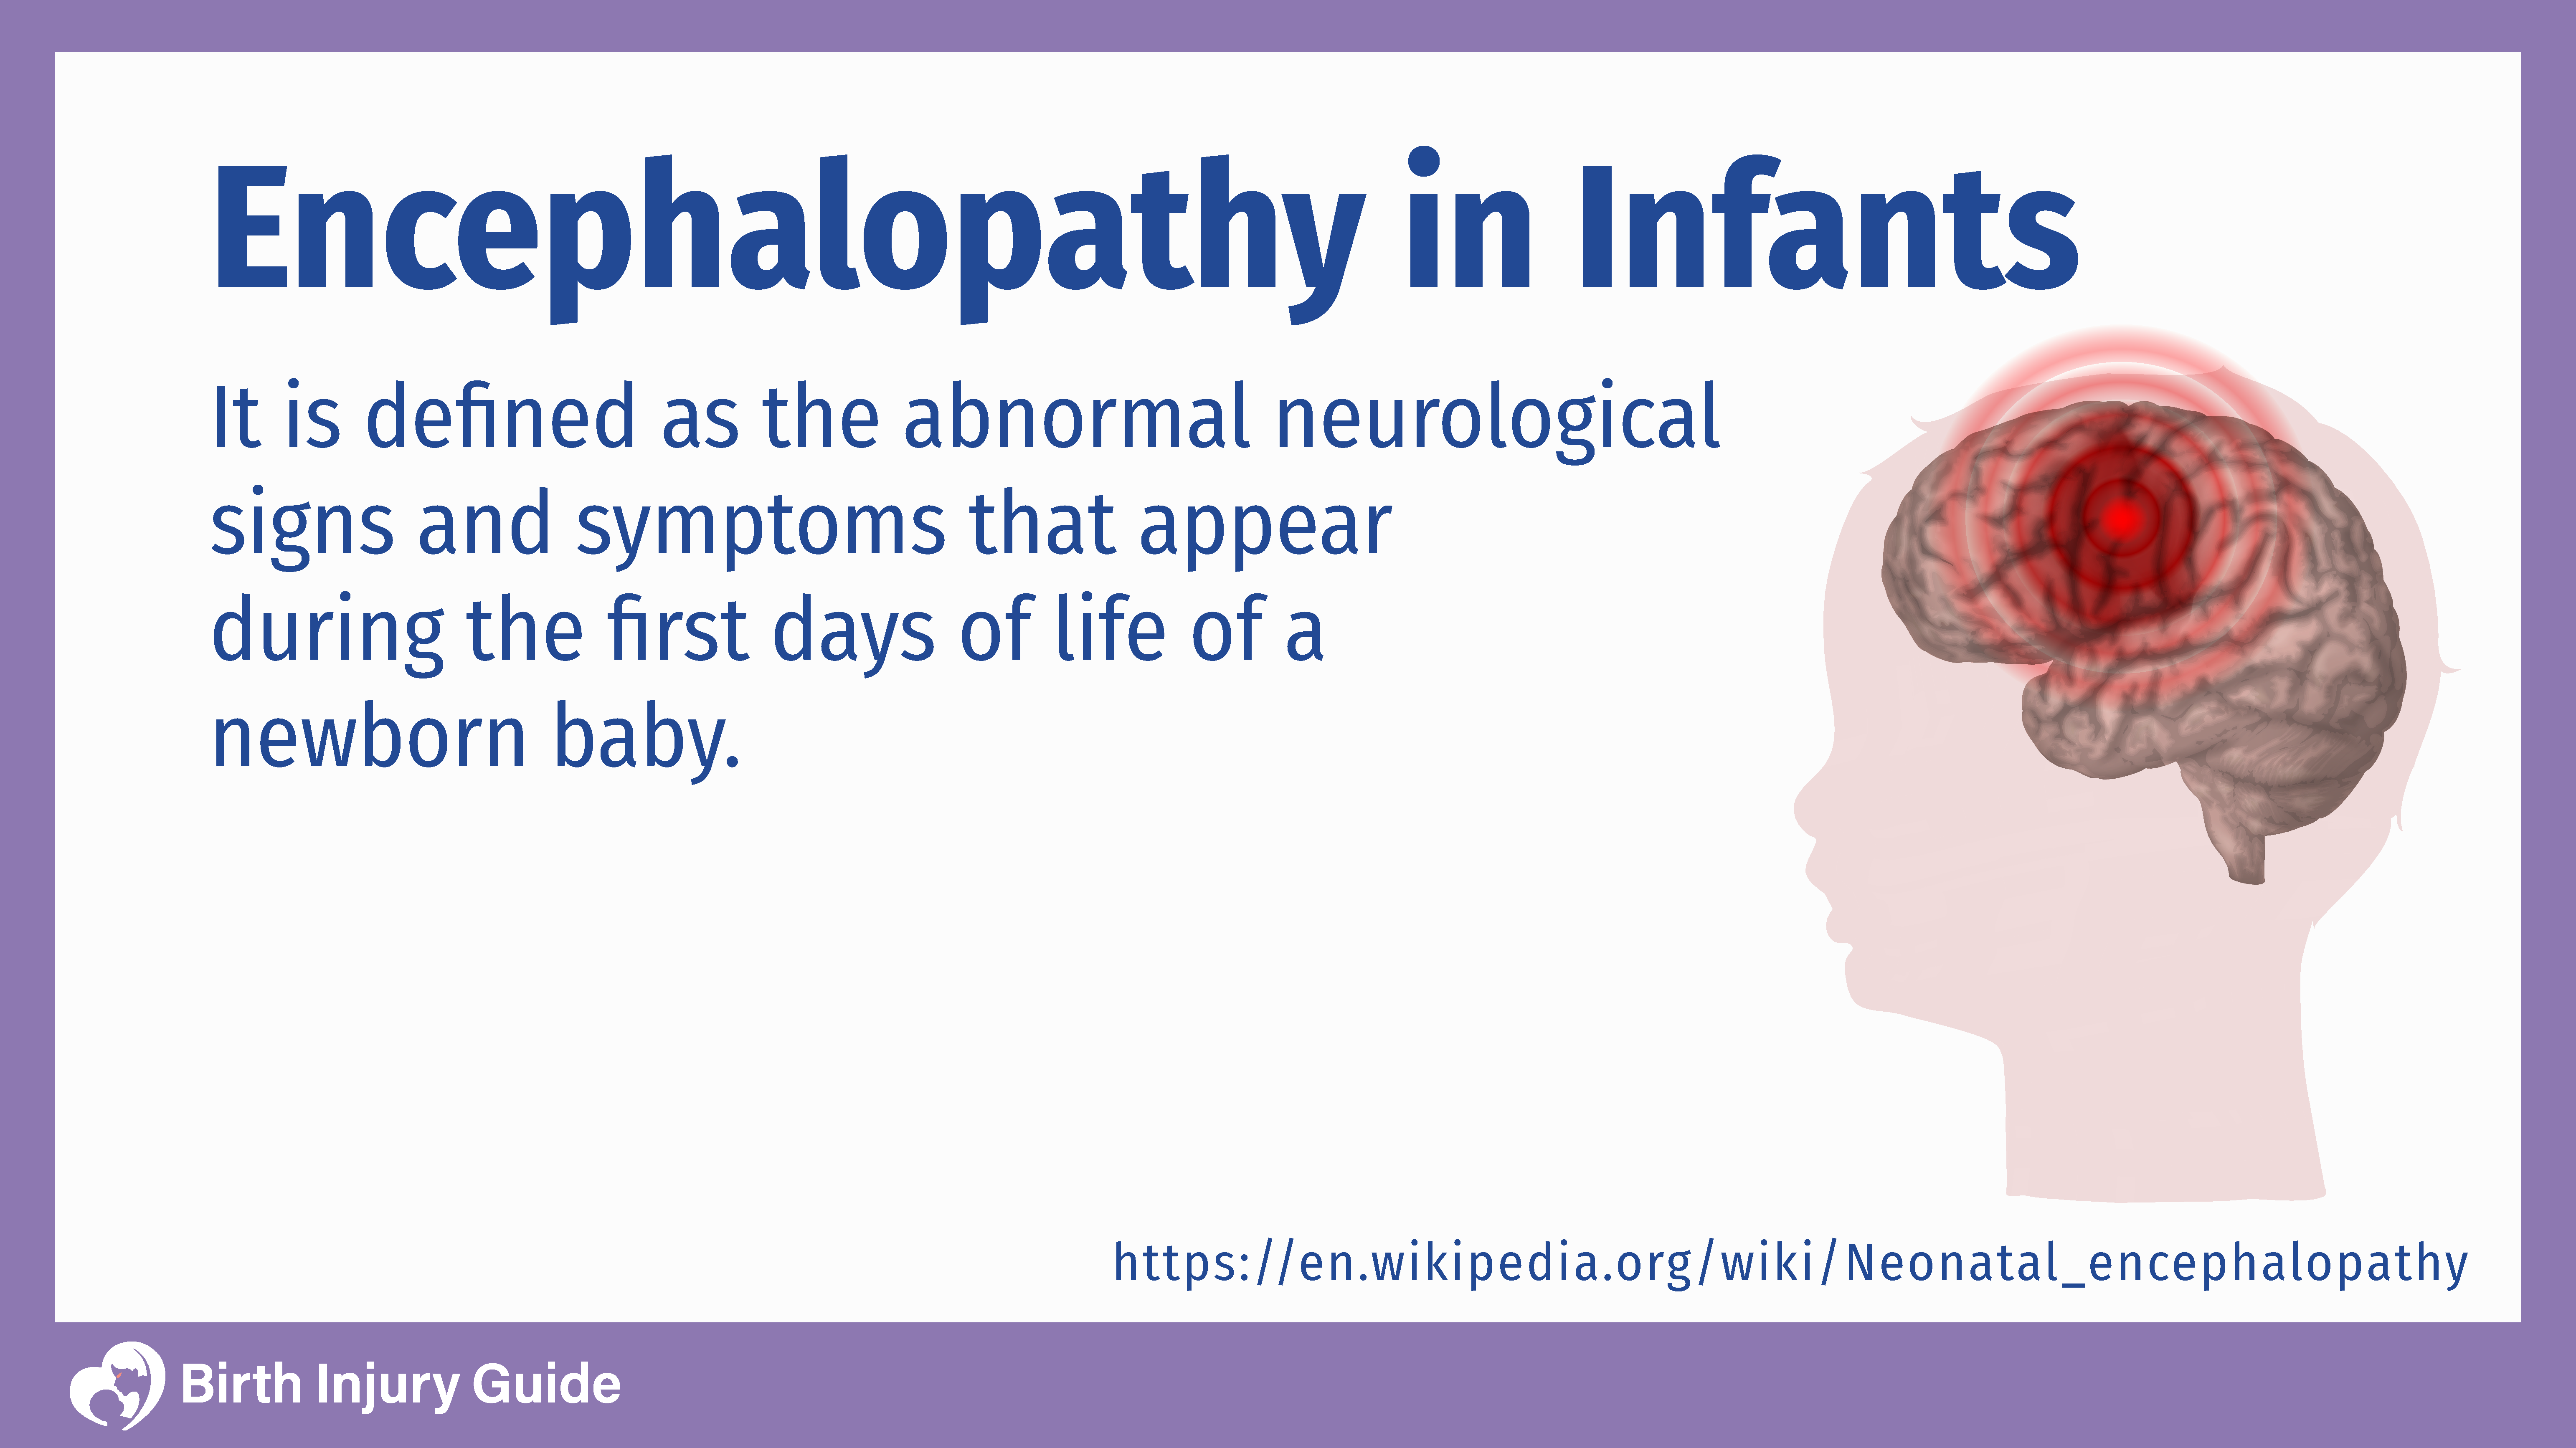 Encephalopathy in infants with image of infant brain injury